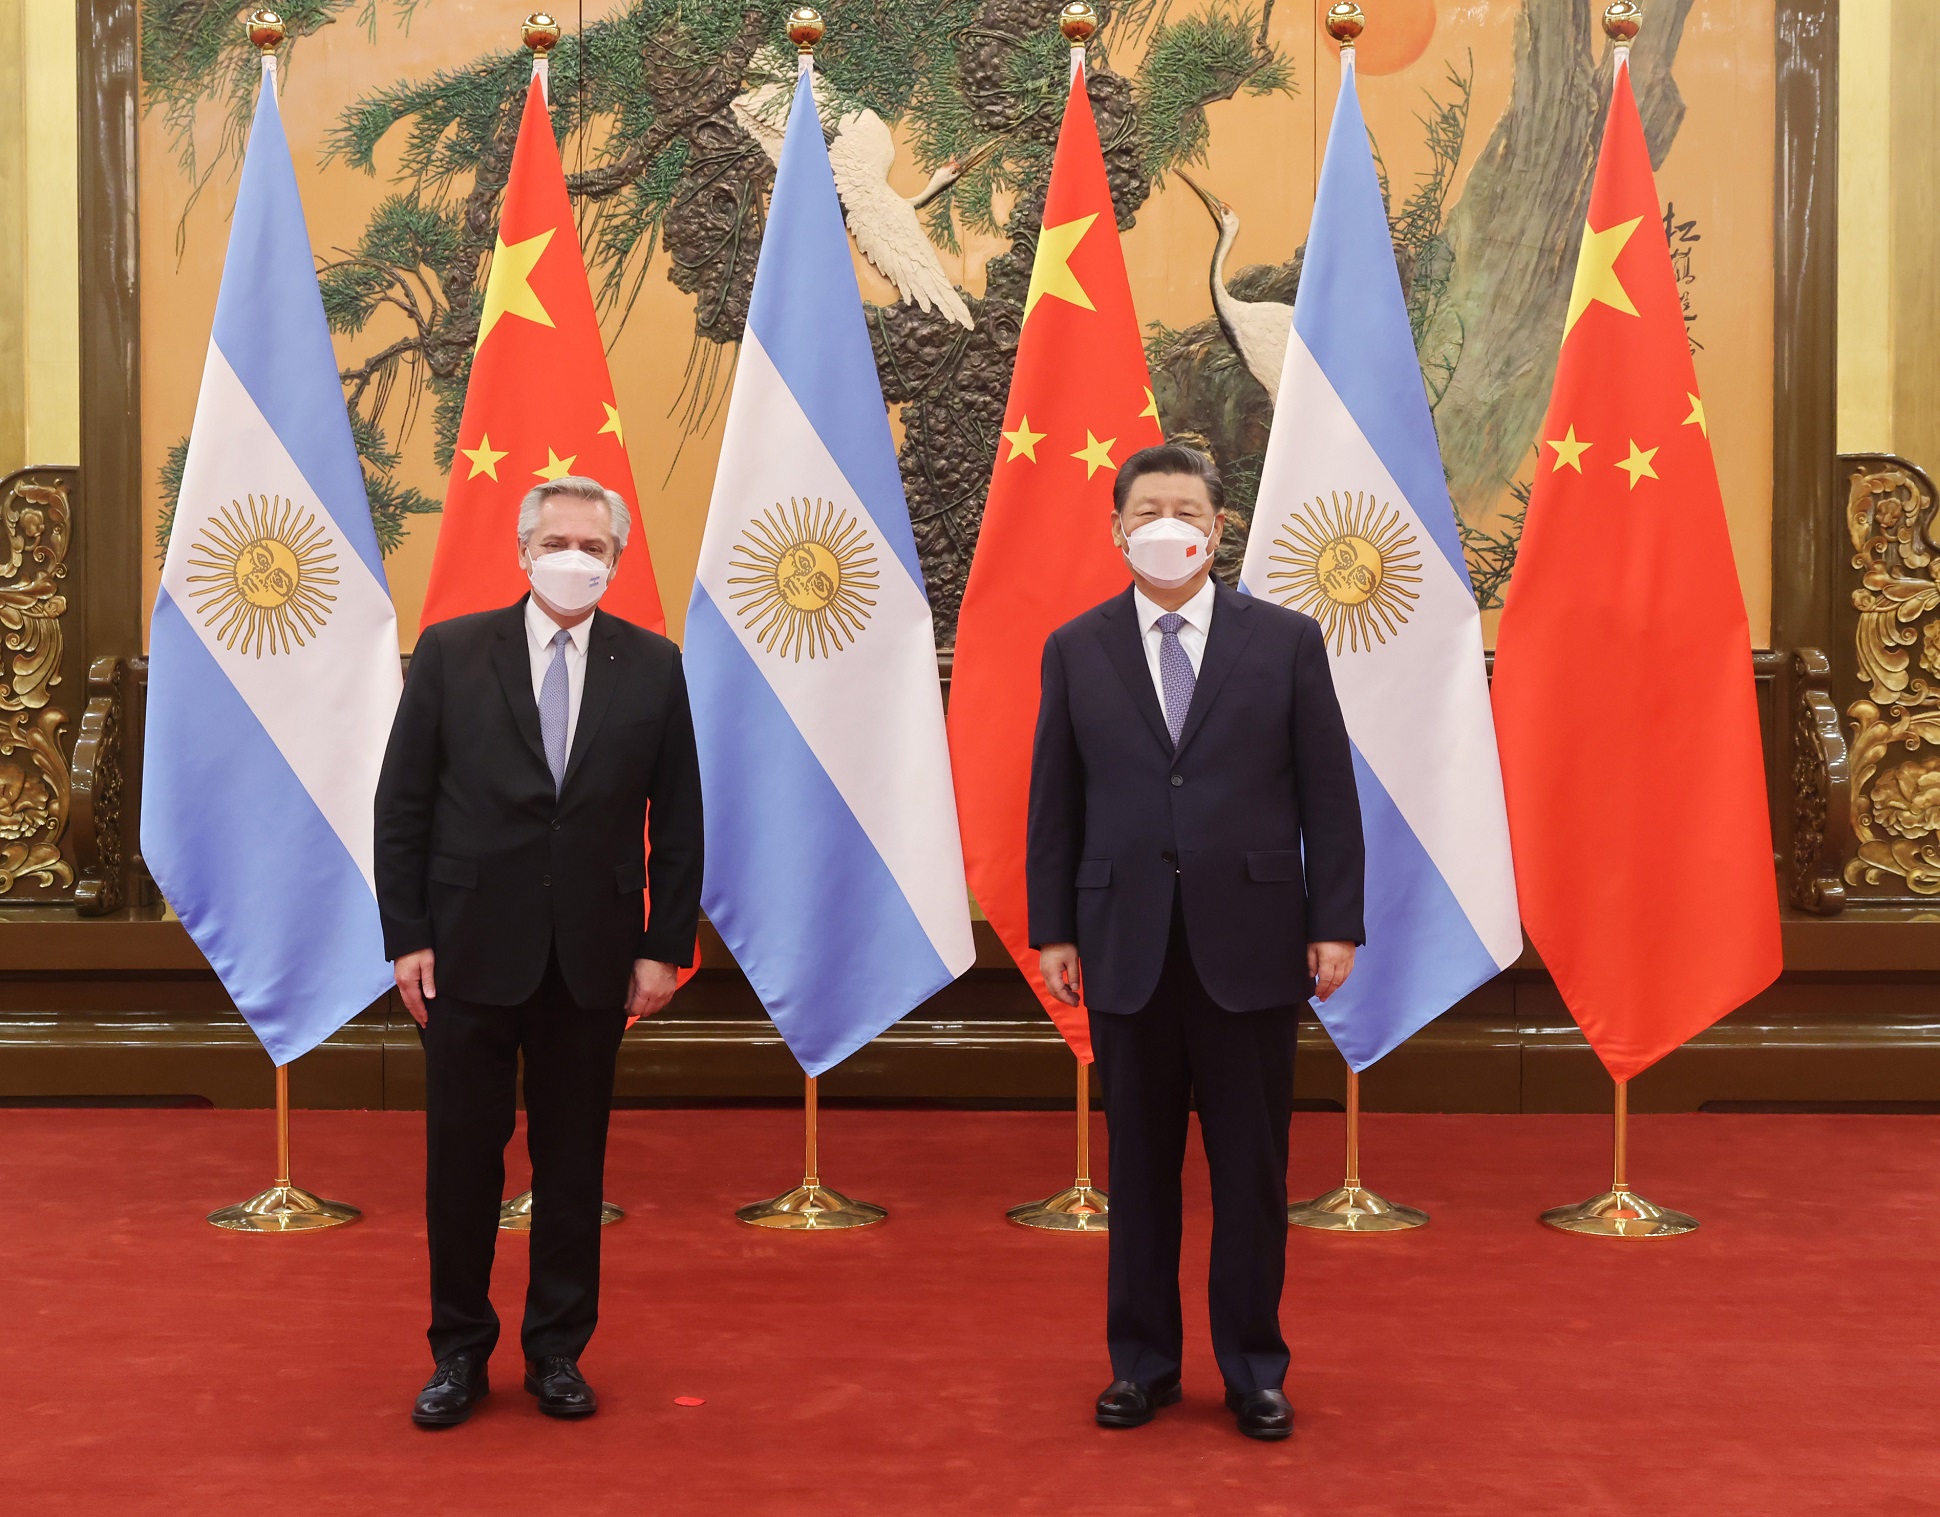 alberto fernandez and xi jinping pose with chinstraps on and flags of China and Argentina behind.